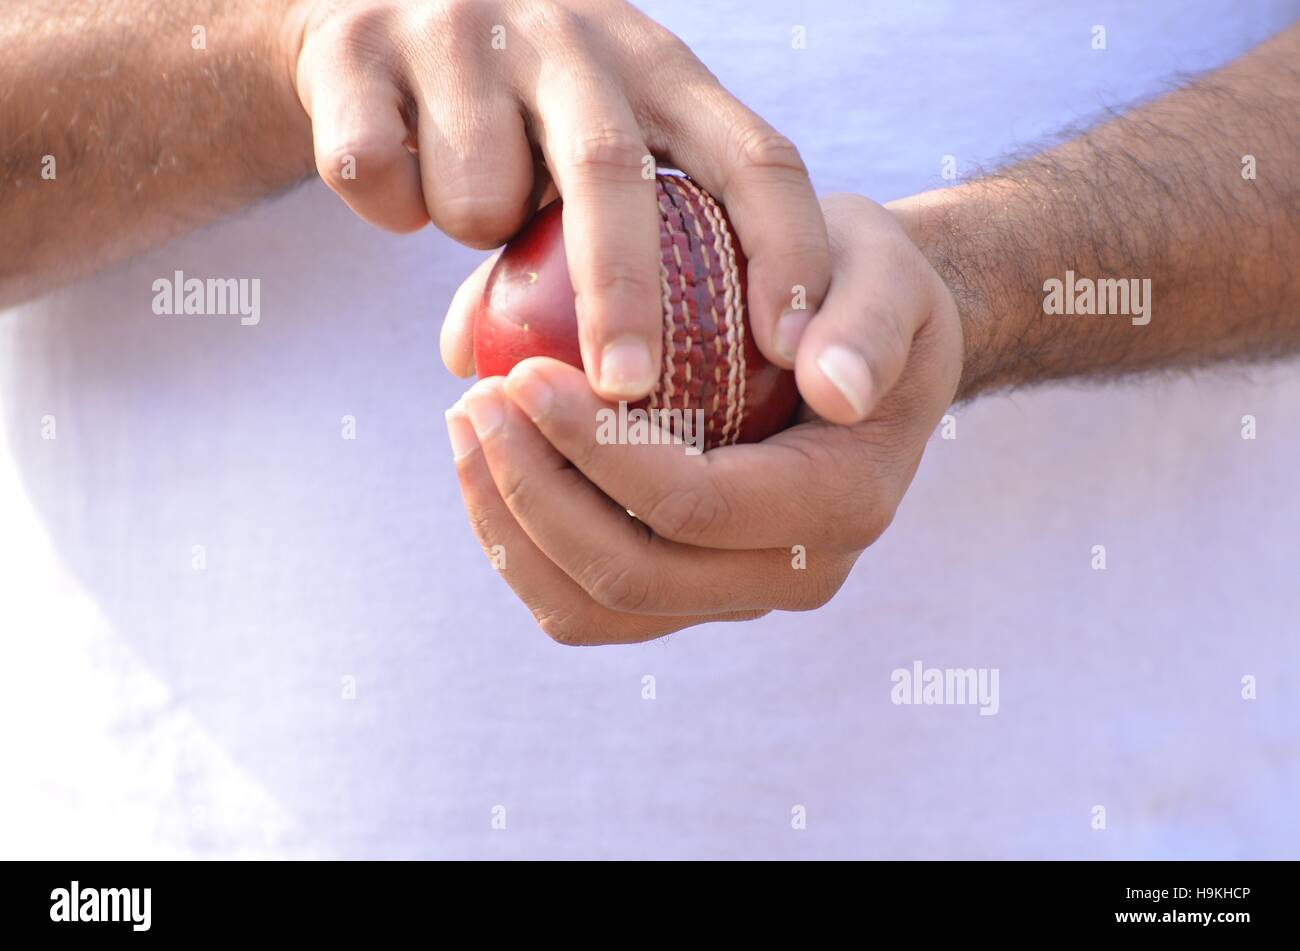 cricket fast bowler going to ball. Stock Photo